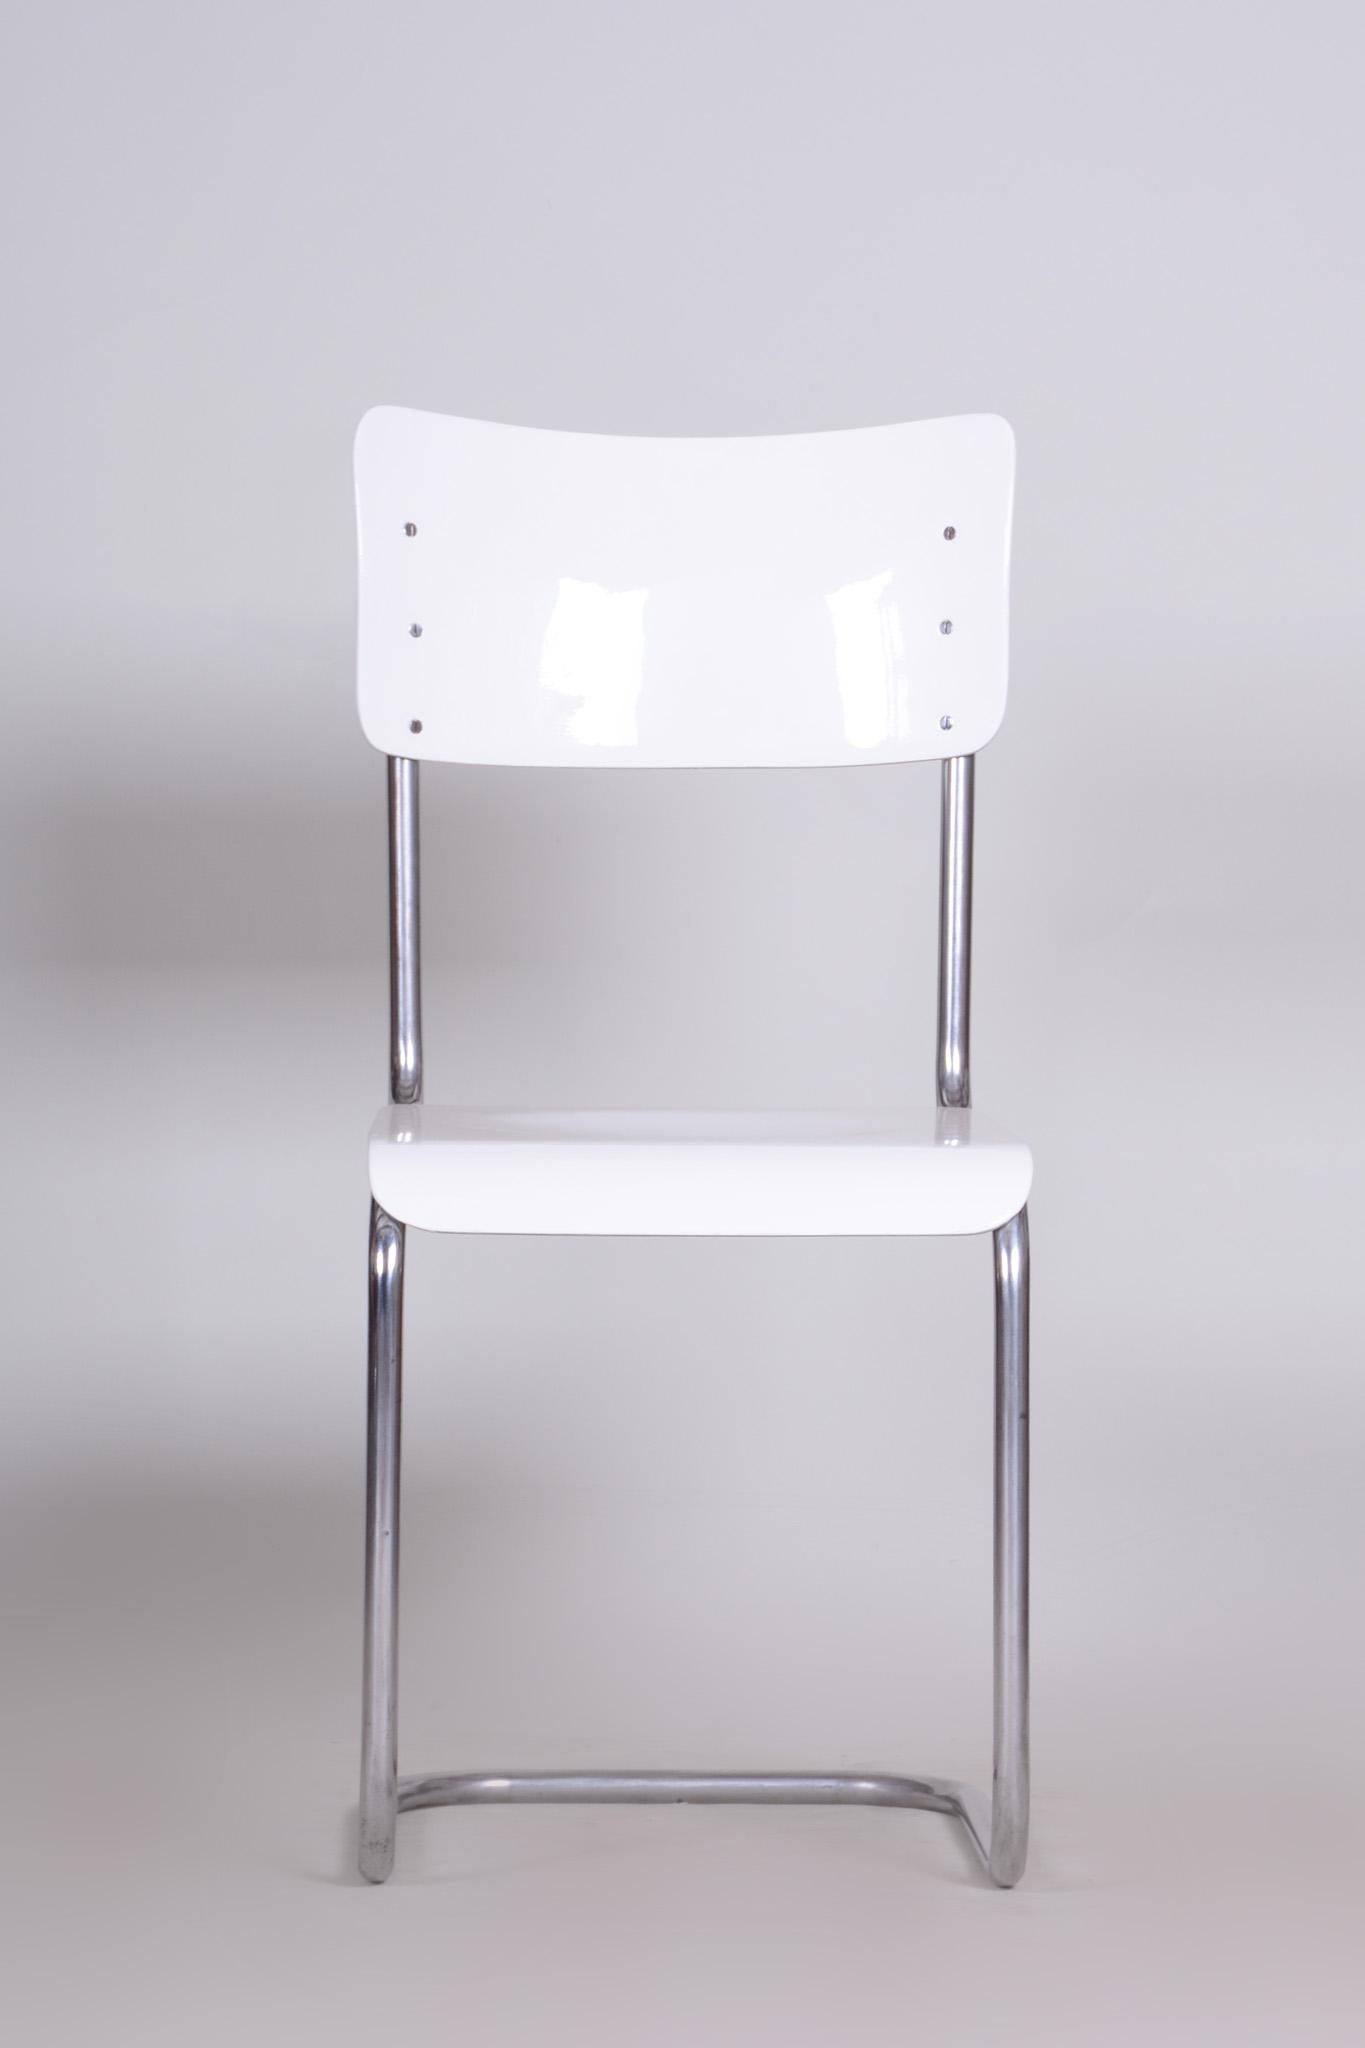 This original Bauhaus chair manufactured by Vichr a spol is a perfect representation of the simplistic elegance of the Bauhaus Era.

We guarantee the cheapest air transport from Europe to the whole world within 7 days.
The price is the same as